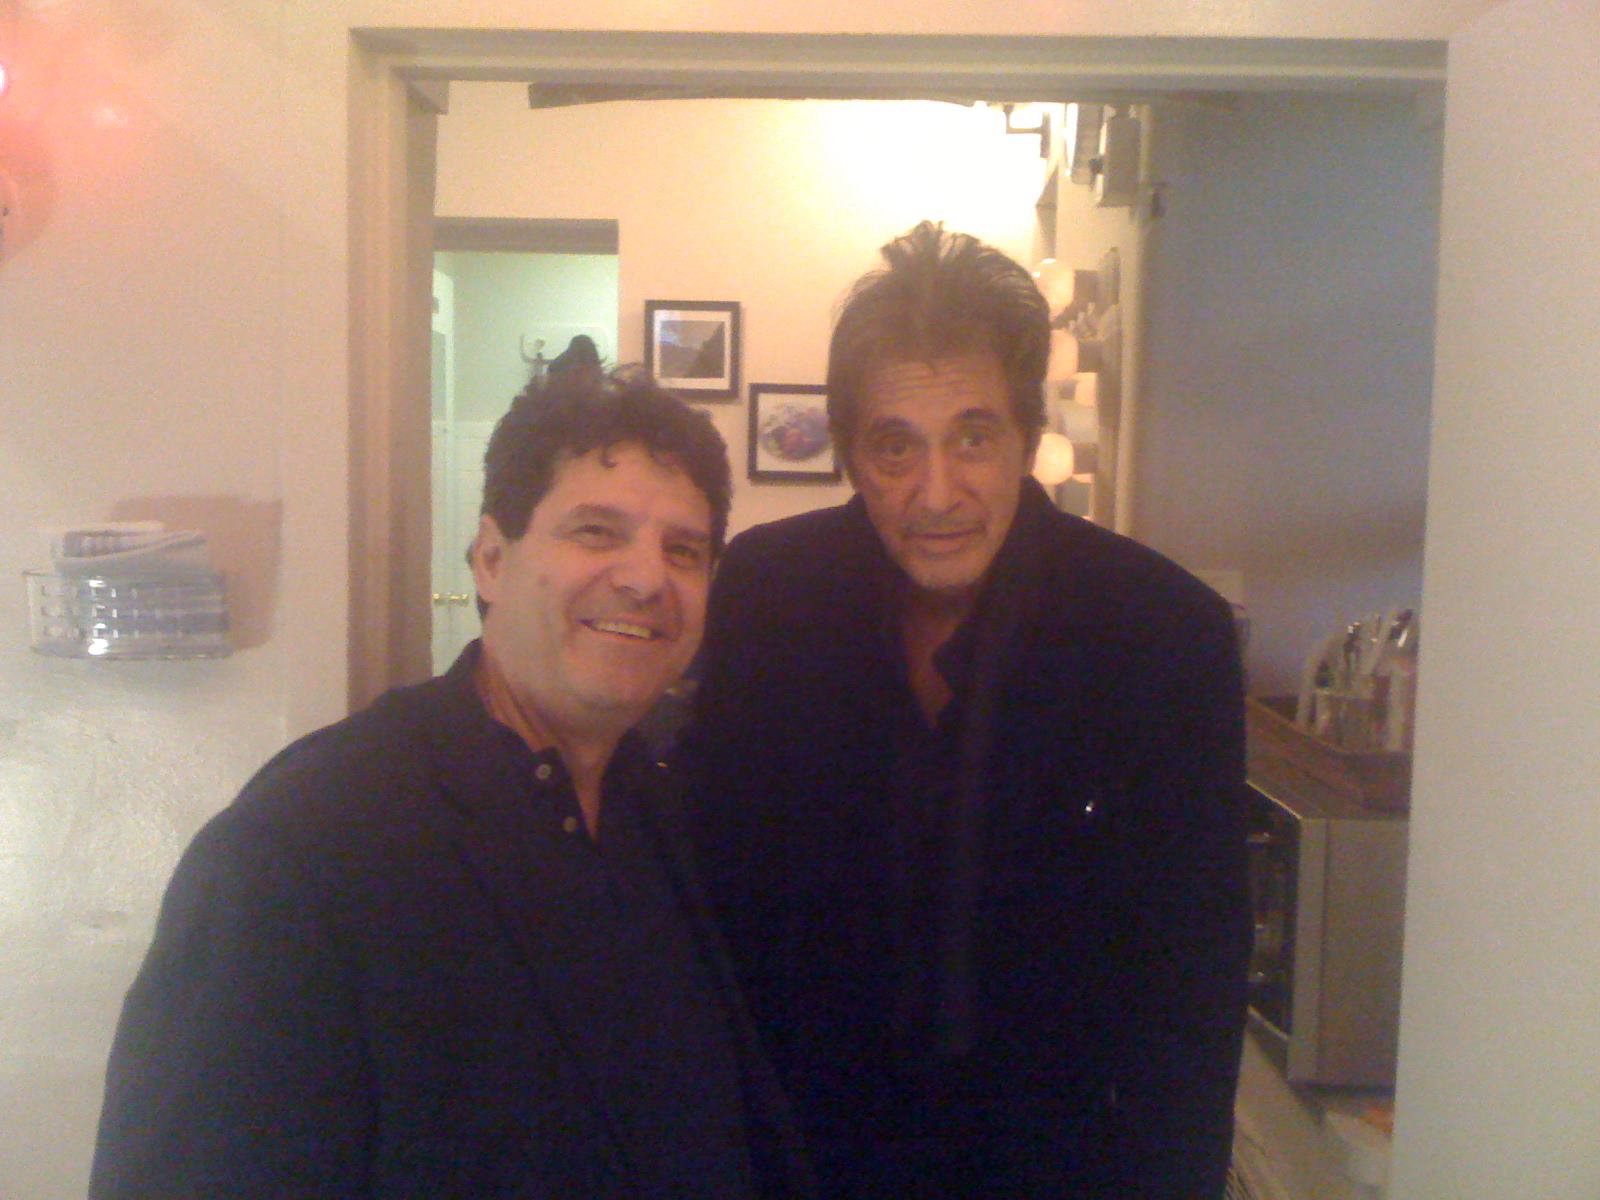 Academy Award winner Al Pacino (The Godfather trilogy, Scarface, Scent of a Woman) and Rich Rossi